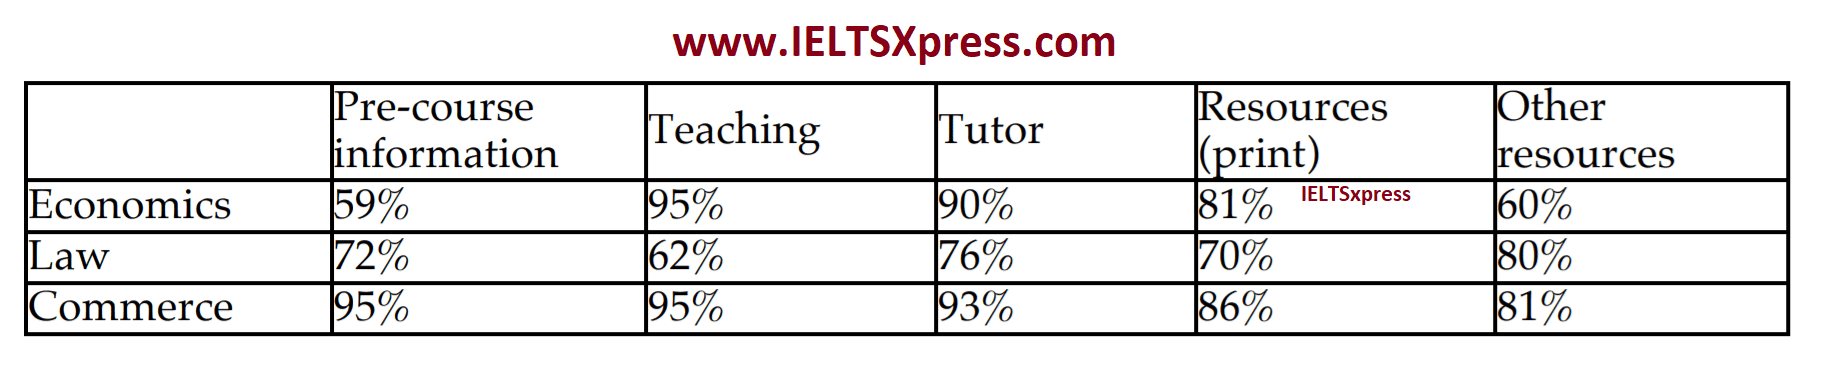 The table below shows the percentage of first-year students who gave very good rating to the resources provided by the college, for three courses ieltsxpress